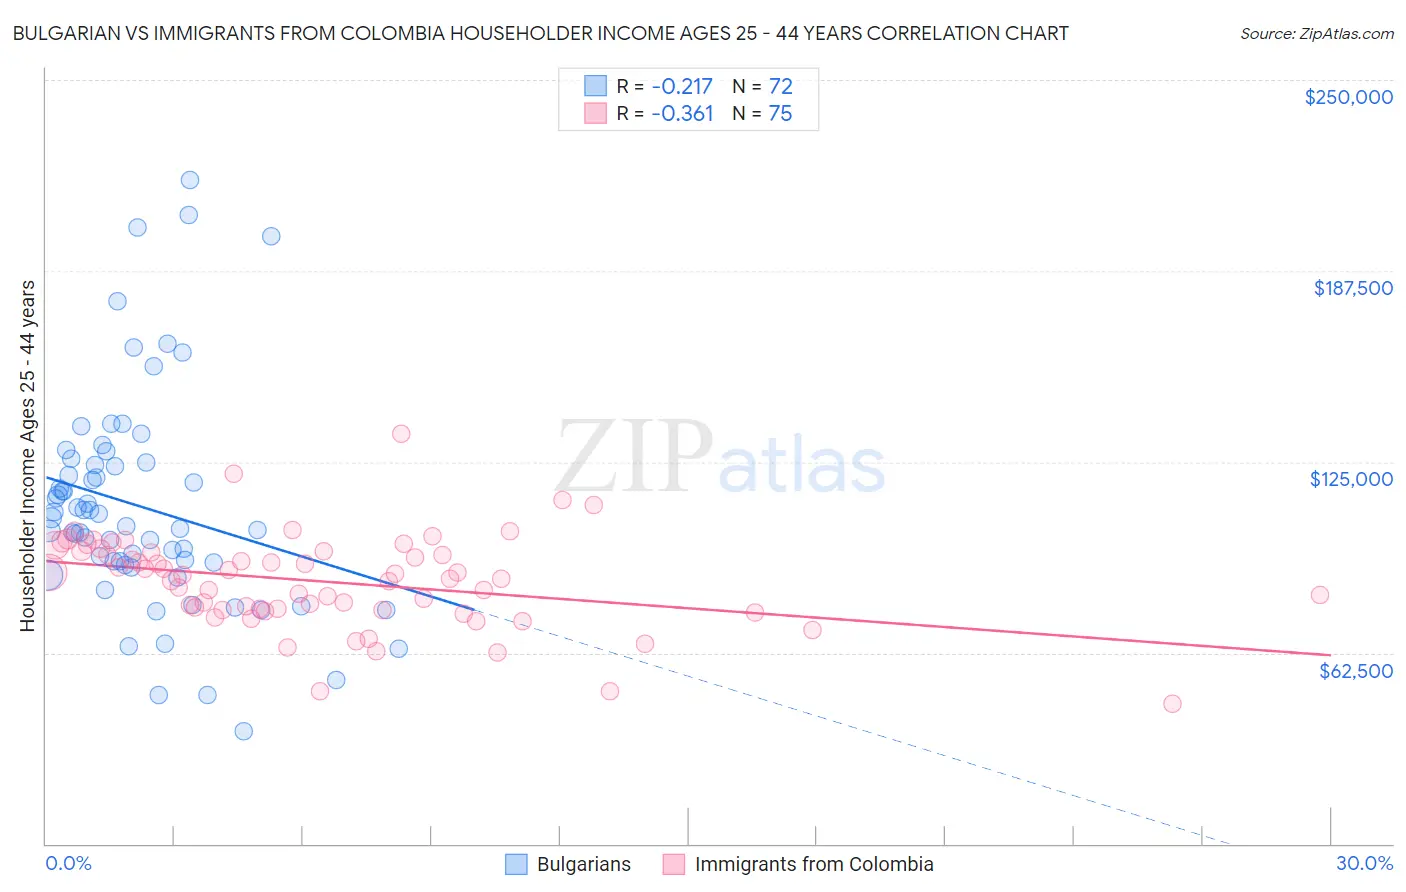 Bulgarian vs Immigrants from Colombia Householder Income Ages 25 - 44 years